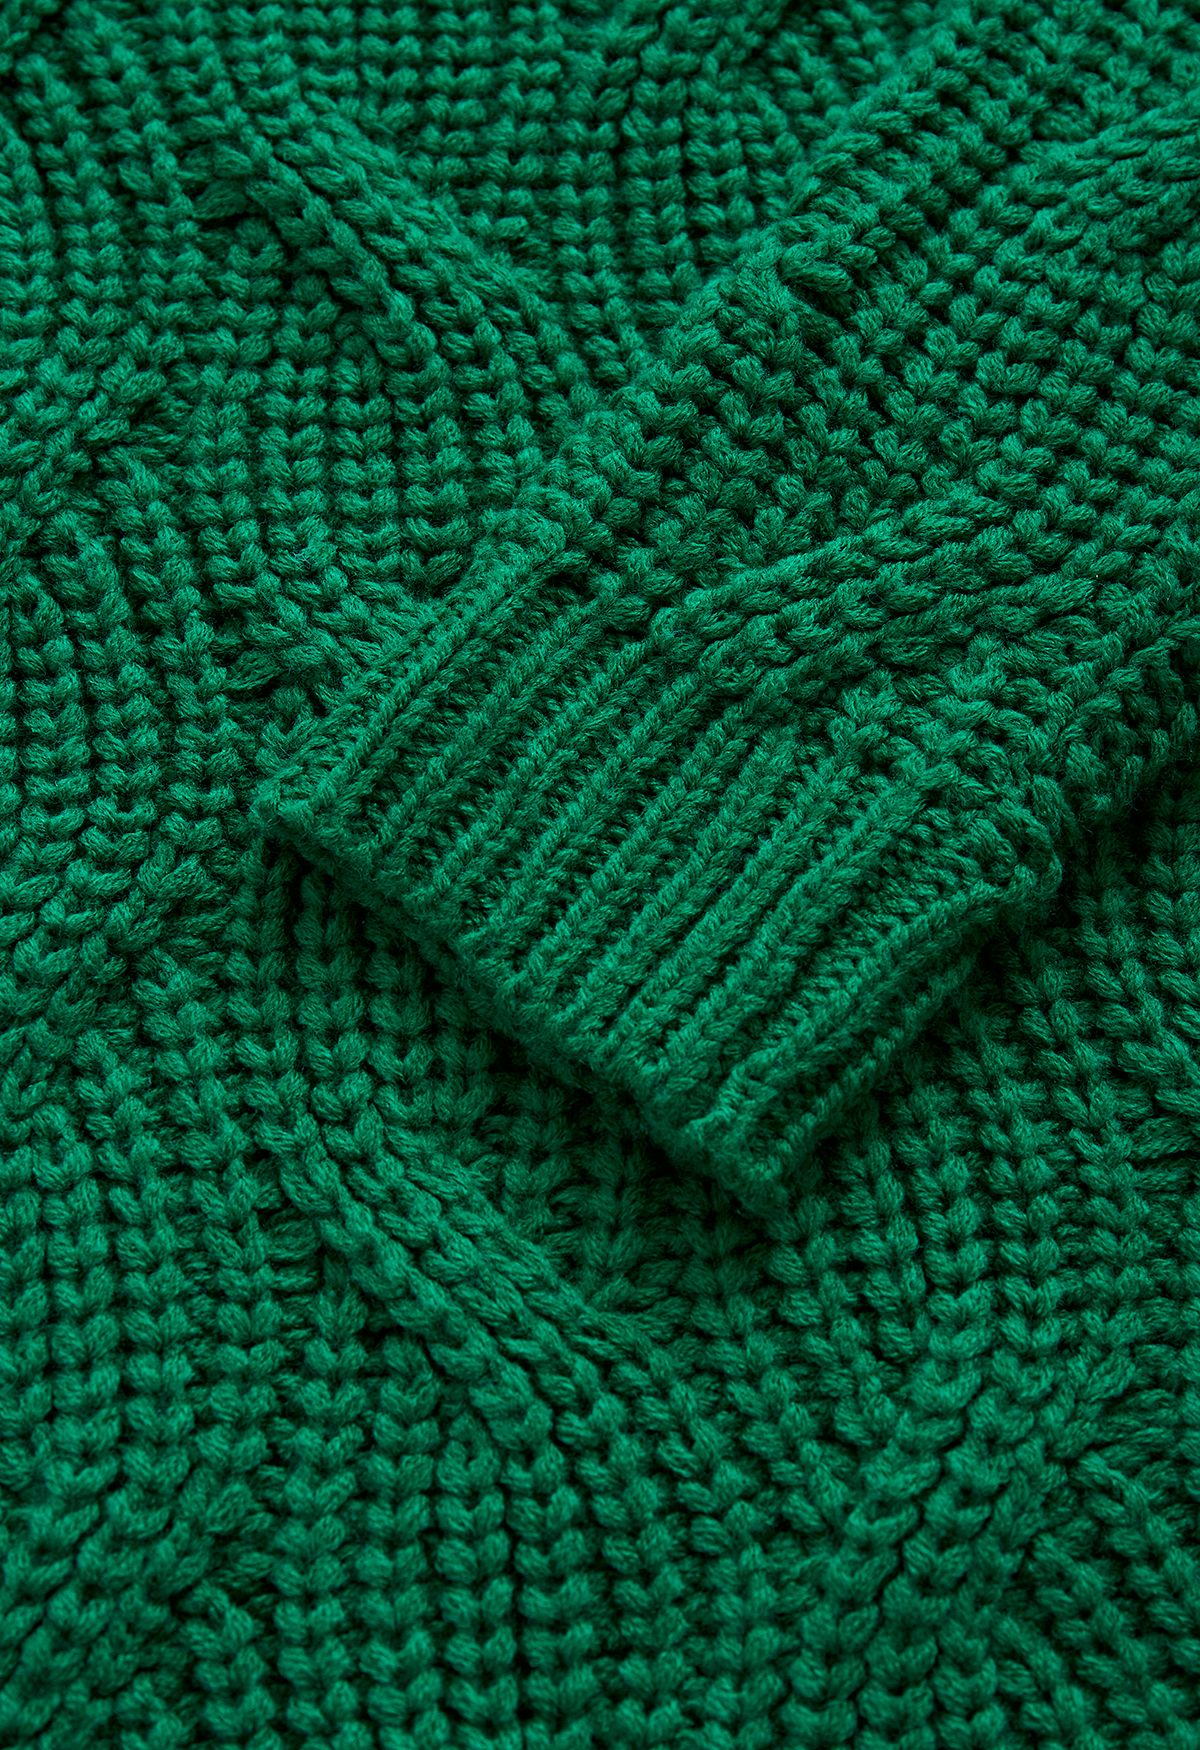 High Neck Hi-Lo Braided Chunky Knit Sweater in Emerald